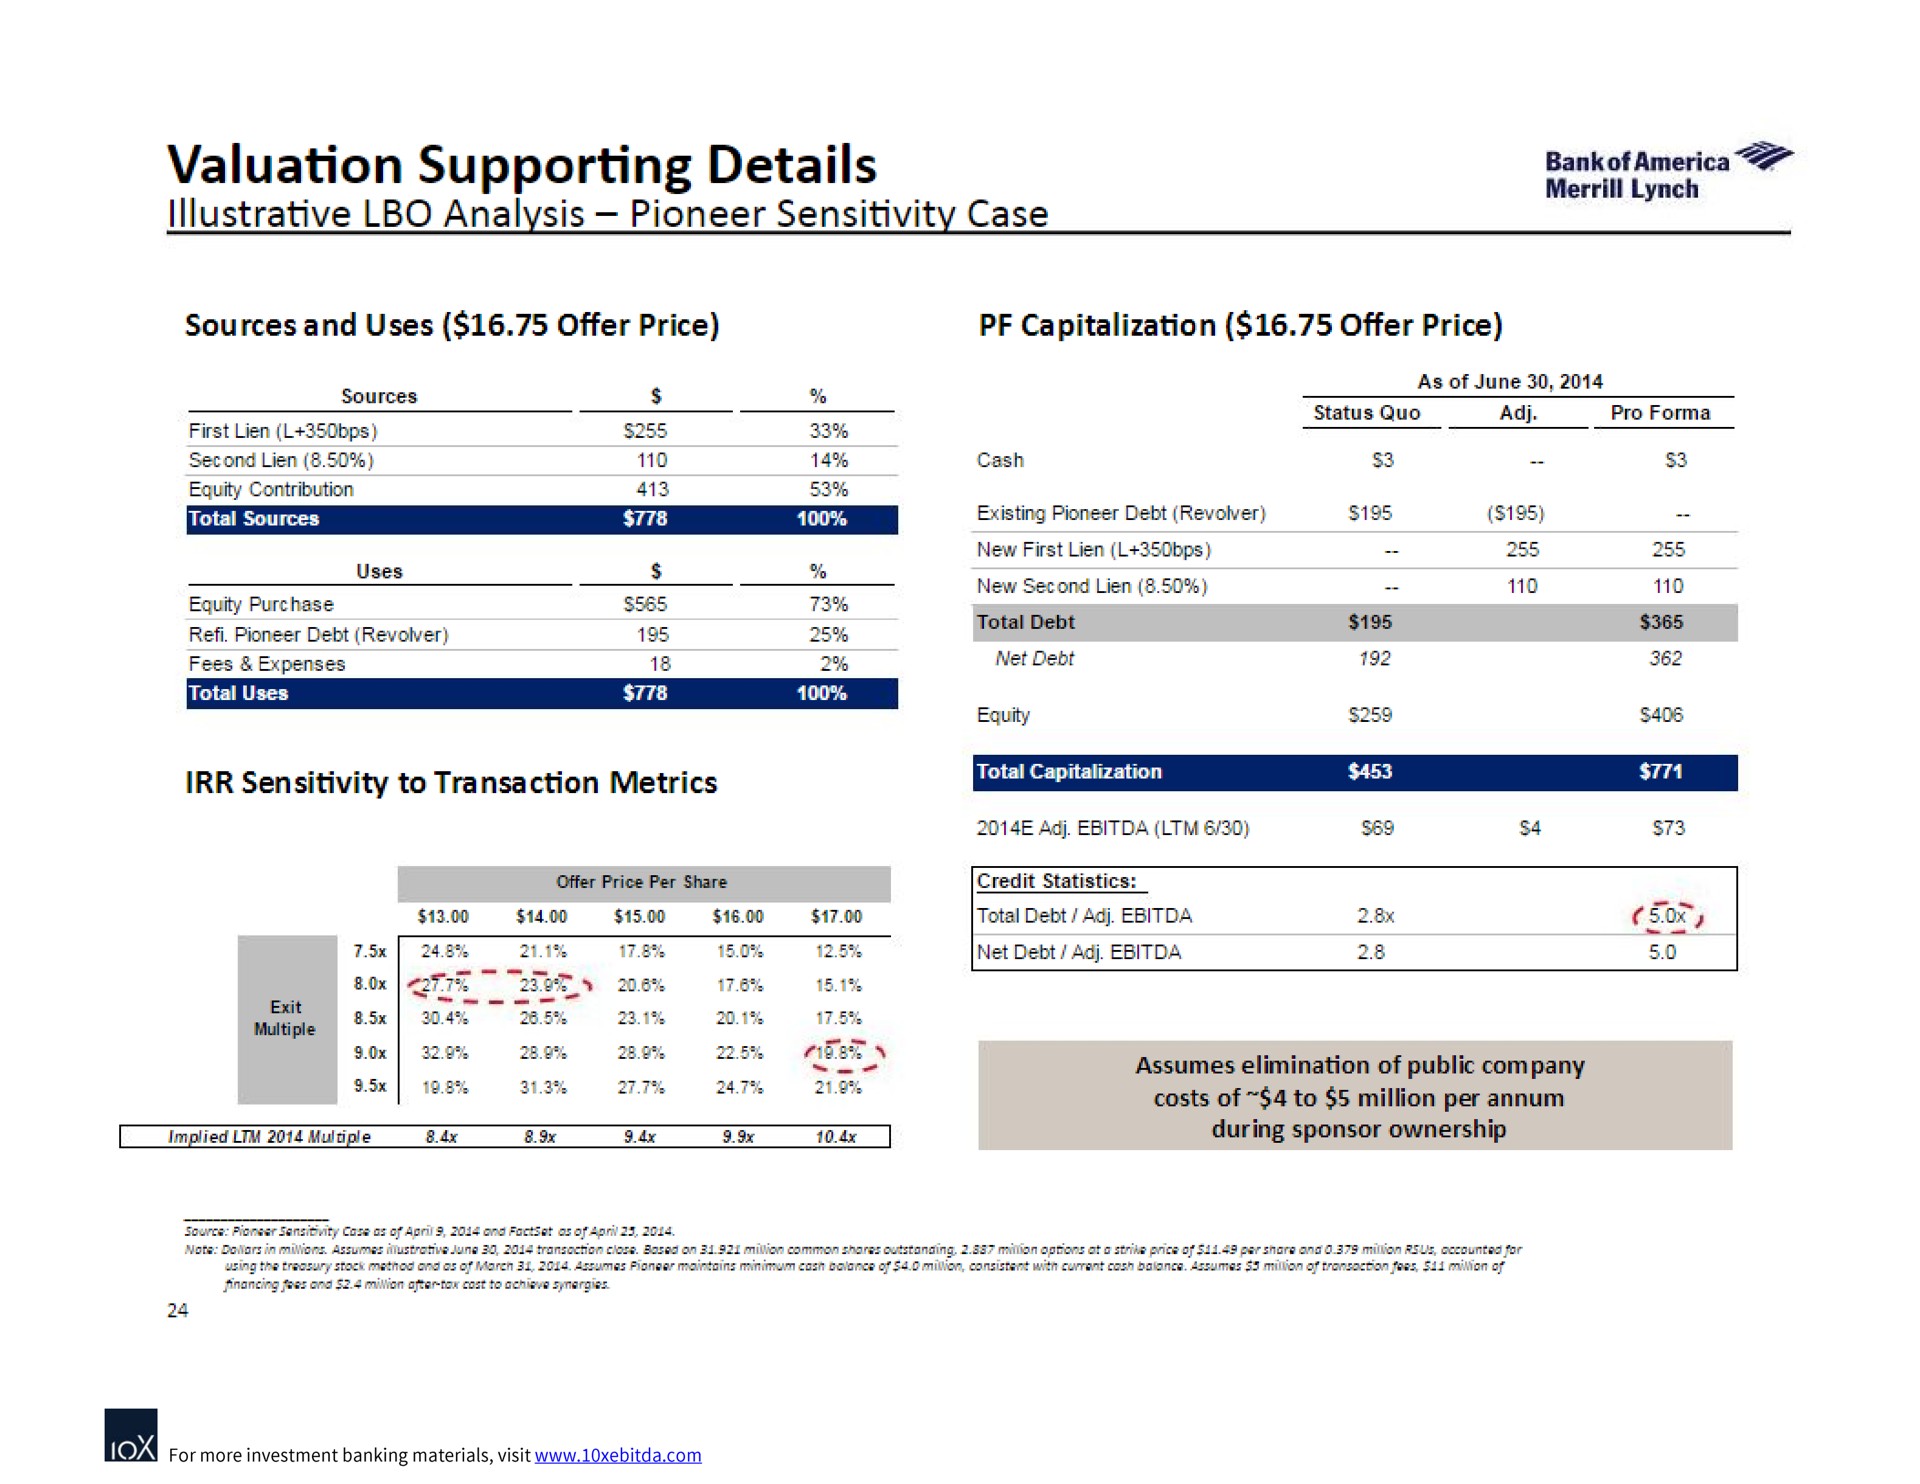 valuation supporting details | Bank of America